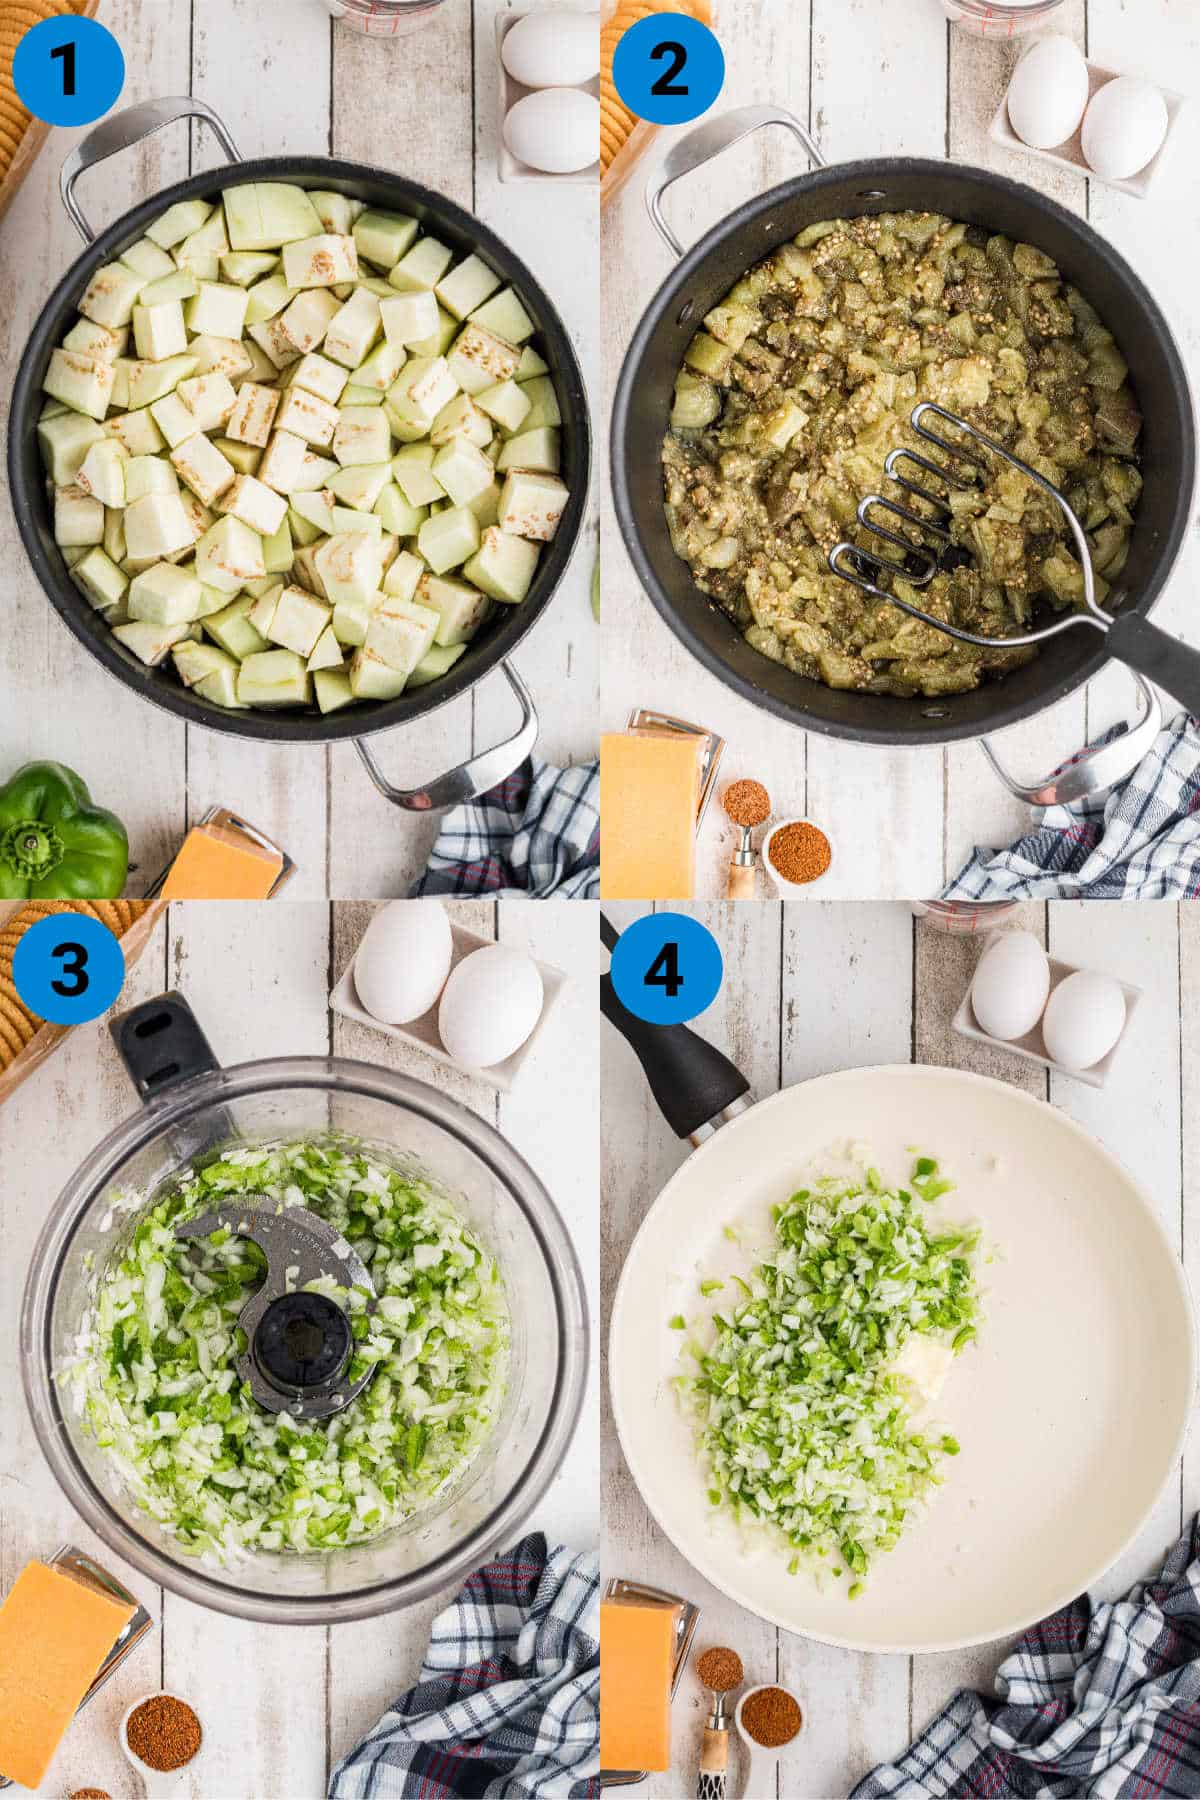 A collage of four images showing how to make an eggplant casserole recipe steps 1-4.